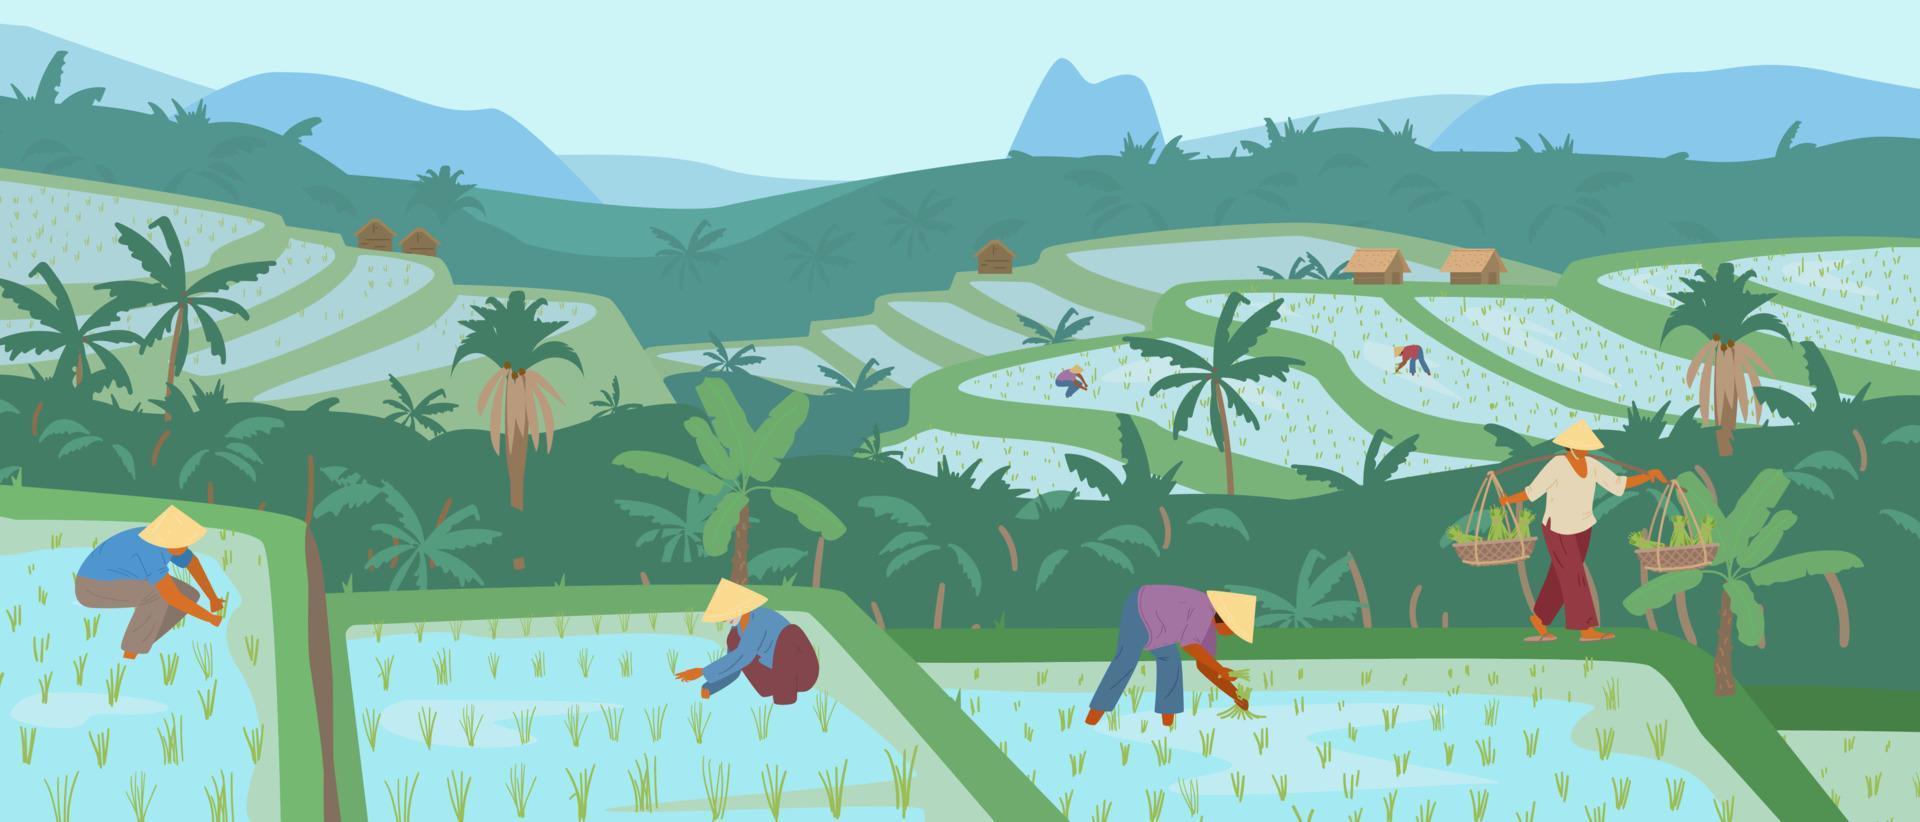 Asian Rice Fields With Workers In Conical Straw Hats. Traditional Agriculture. Vector Illustration.